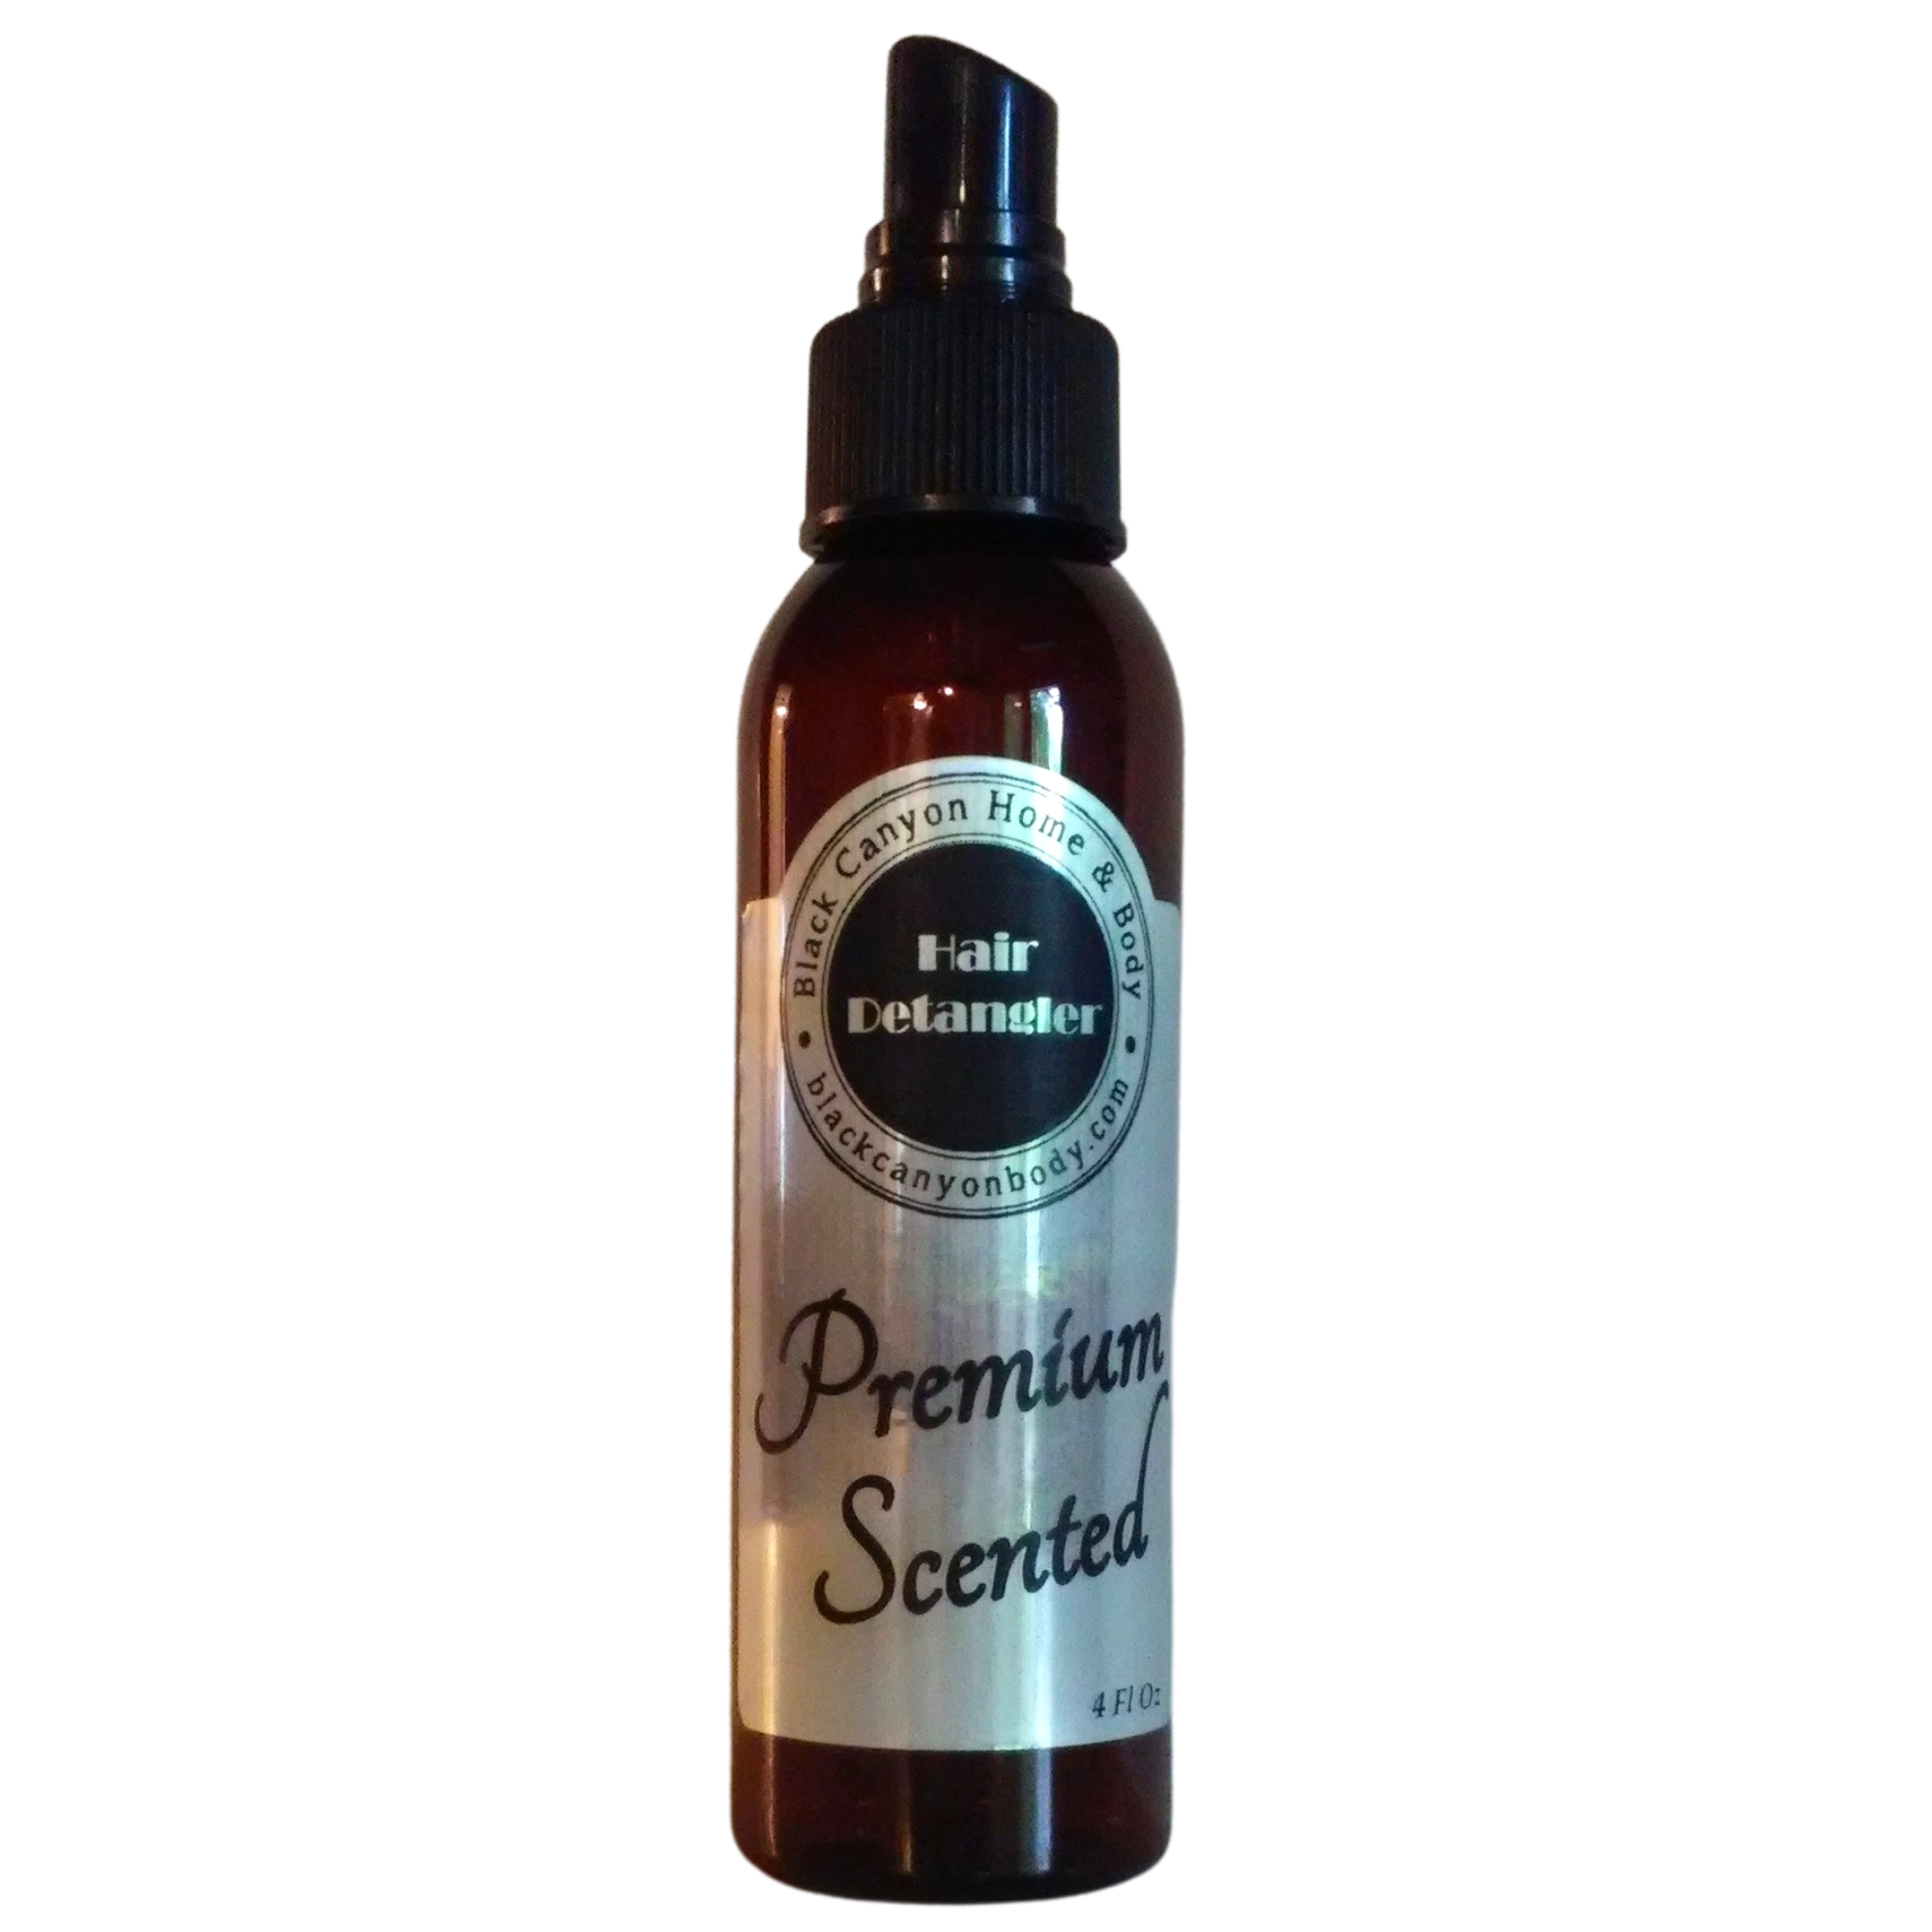 Black Canyon Black Licorice Scented Hair Detangler Spray with Olive Oil